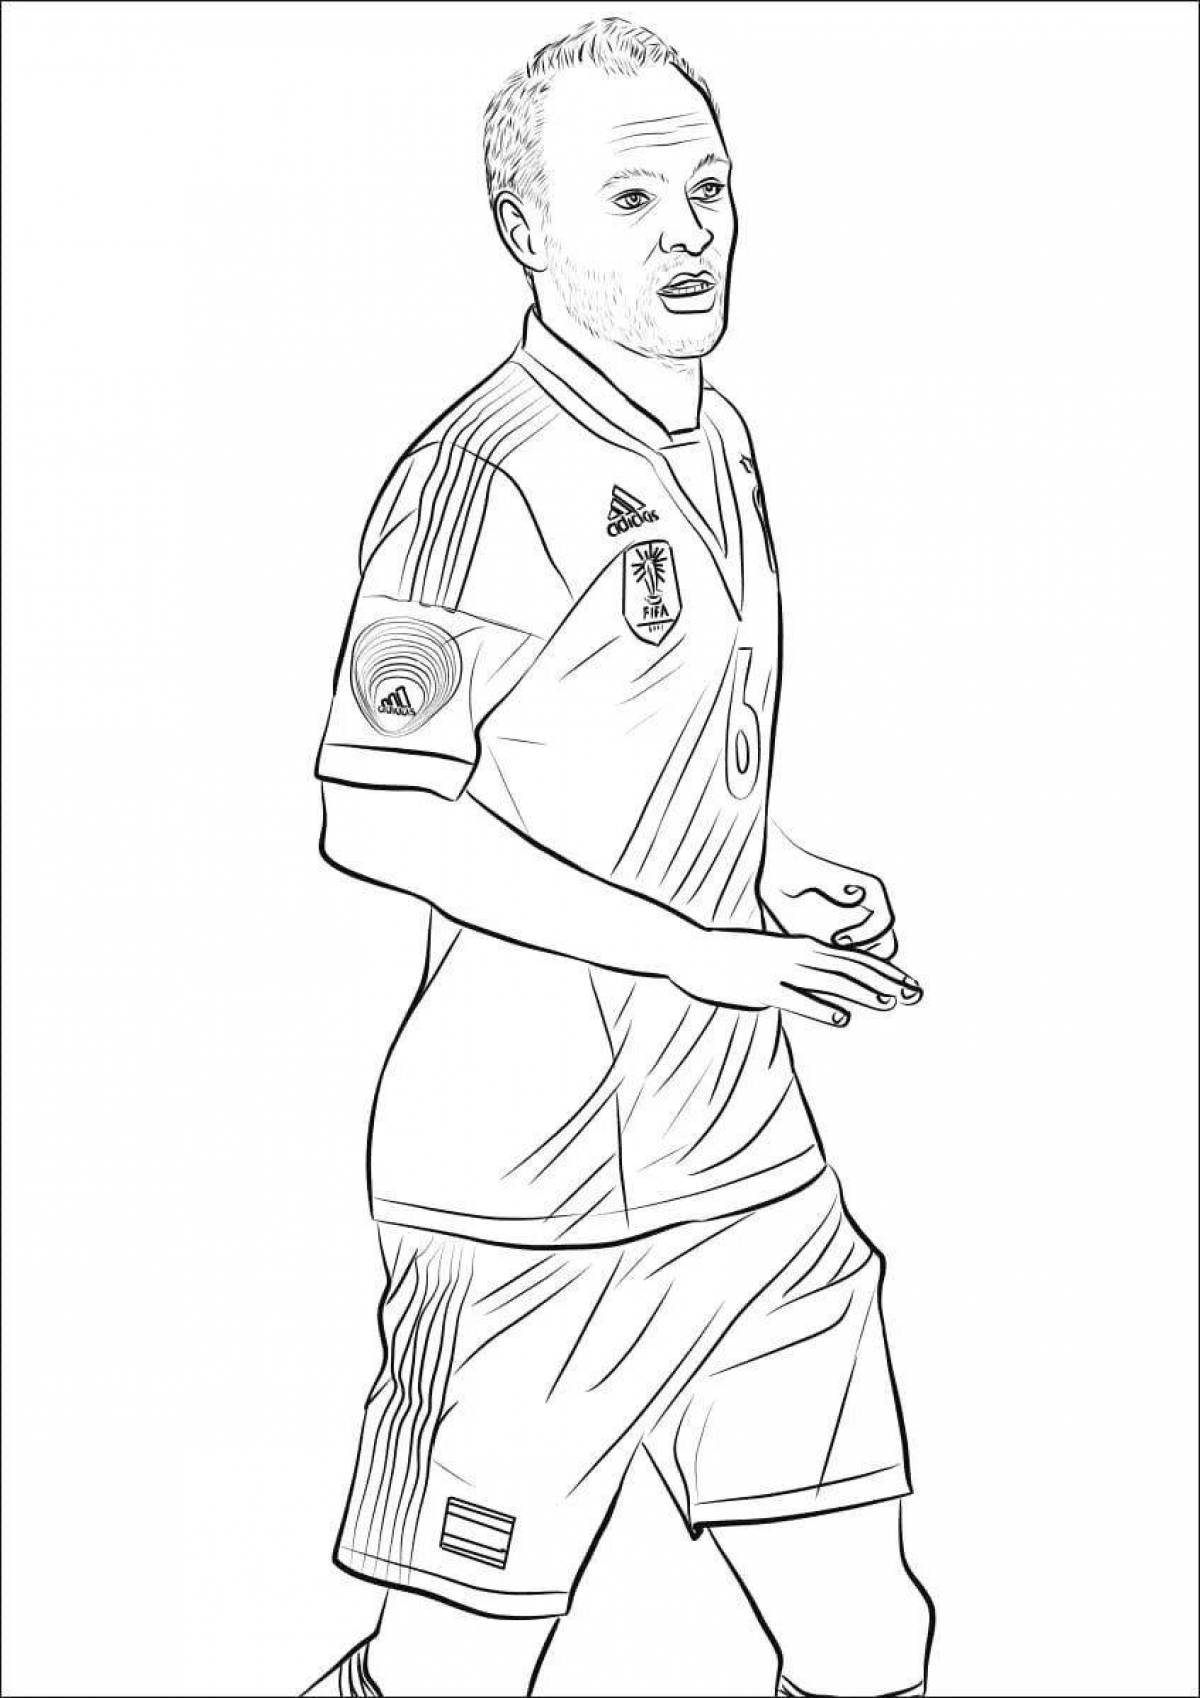 Coloring page great football player